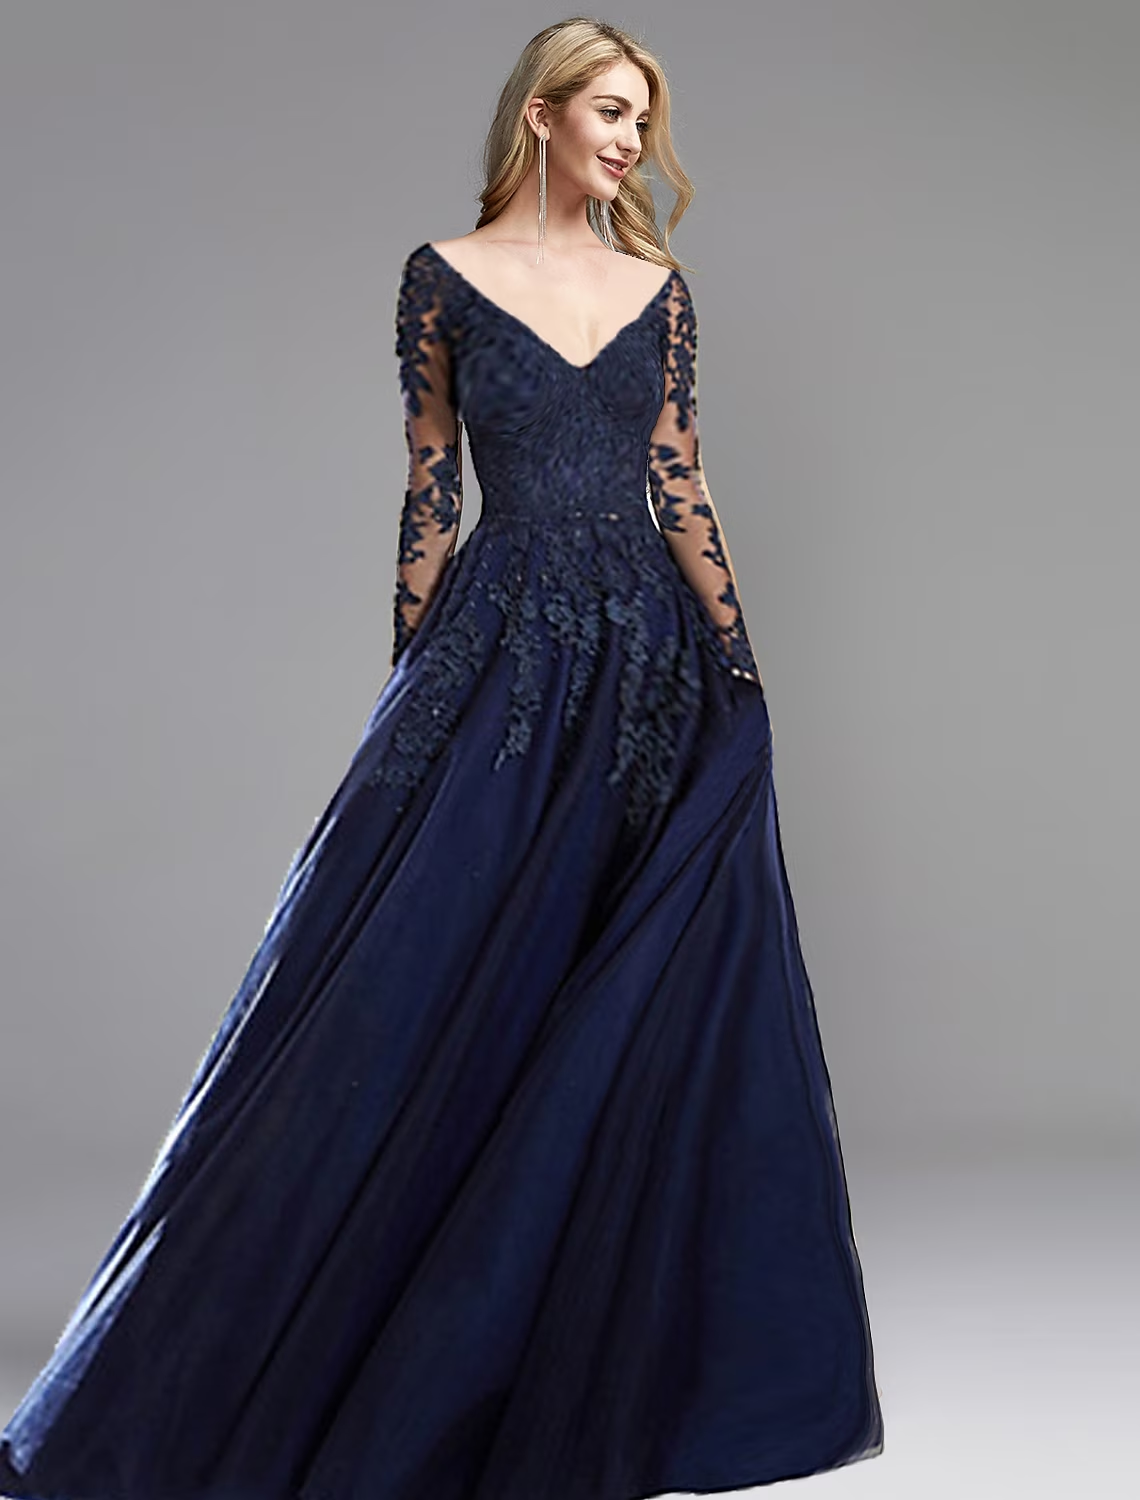 A-Line Evening Gown Open Back Dress Formal Evening Sweep / Brush Train Long Sleeve Plunging Neck Chiffon with Appliques